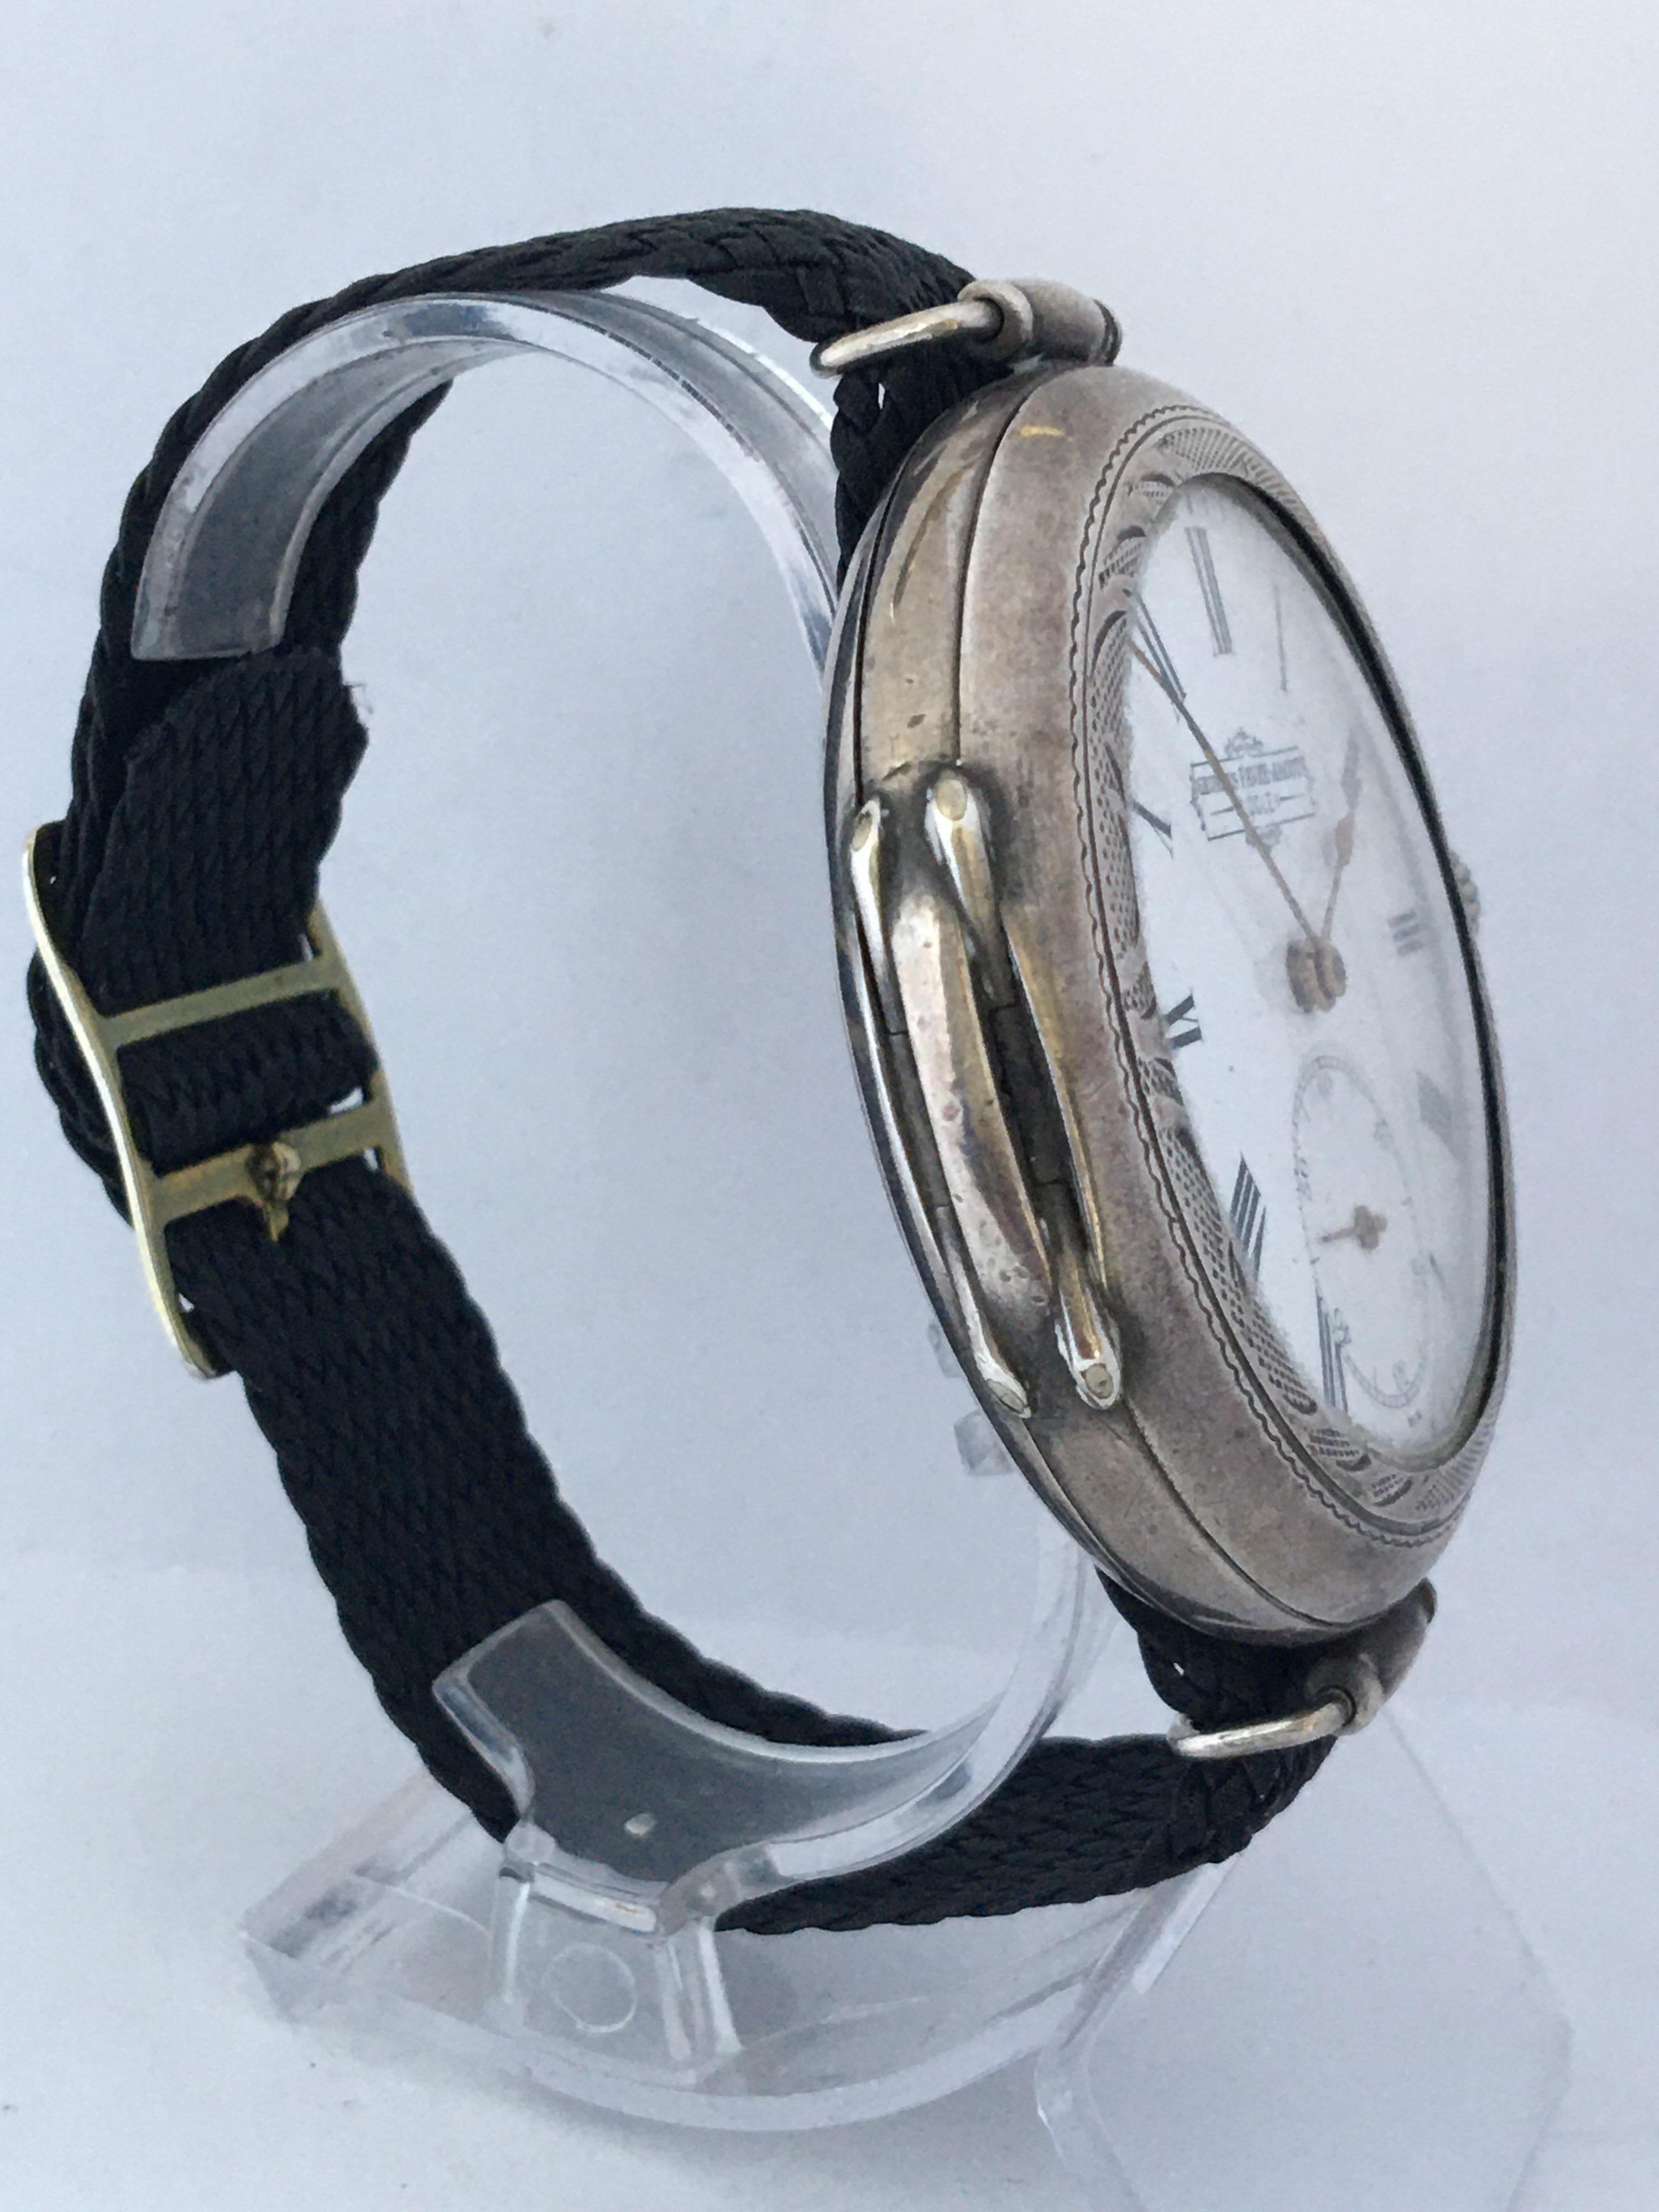 This fine and rare antique Georges Favre-Jacot Locle Silver Trench watch is in good working condition and it is running well. Visible signs of wear and ageing with minor dents at the back cover silver case.

this watch is 55mm diameter without the